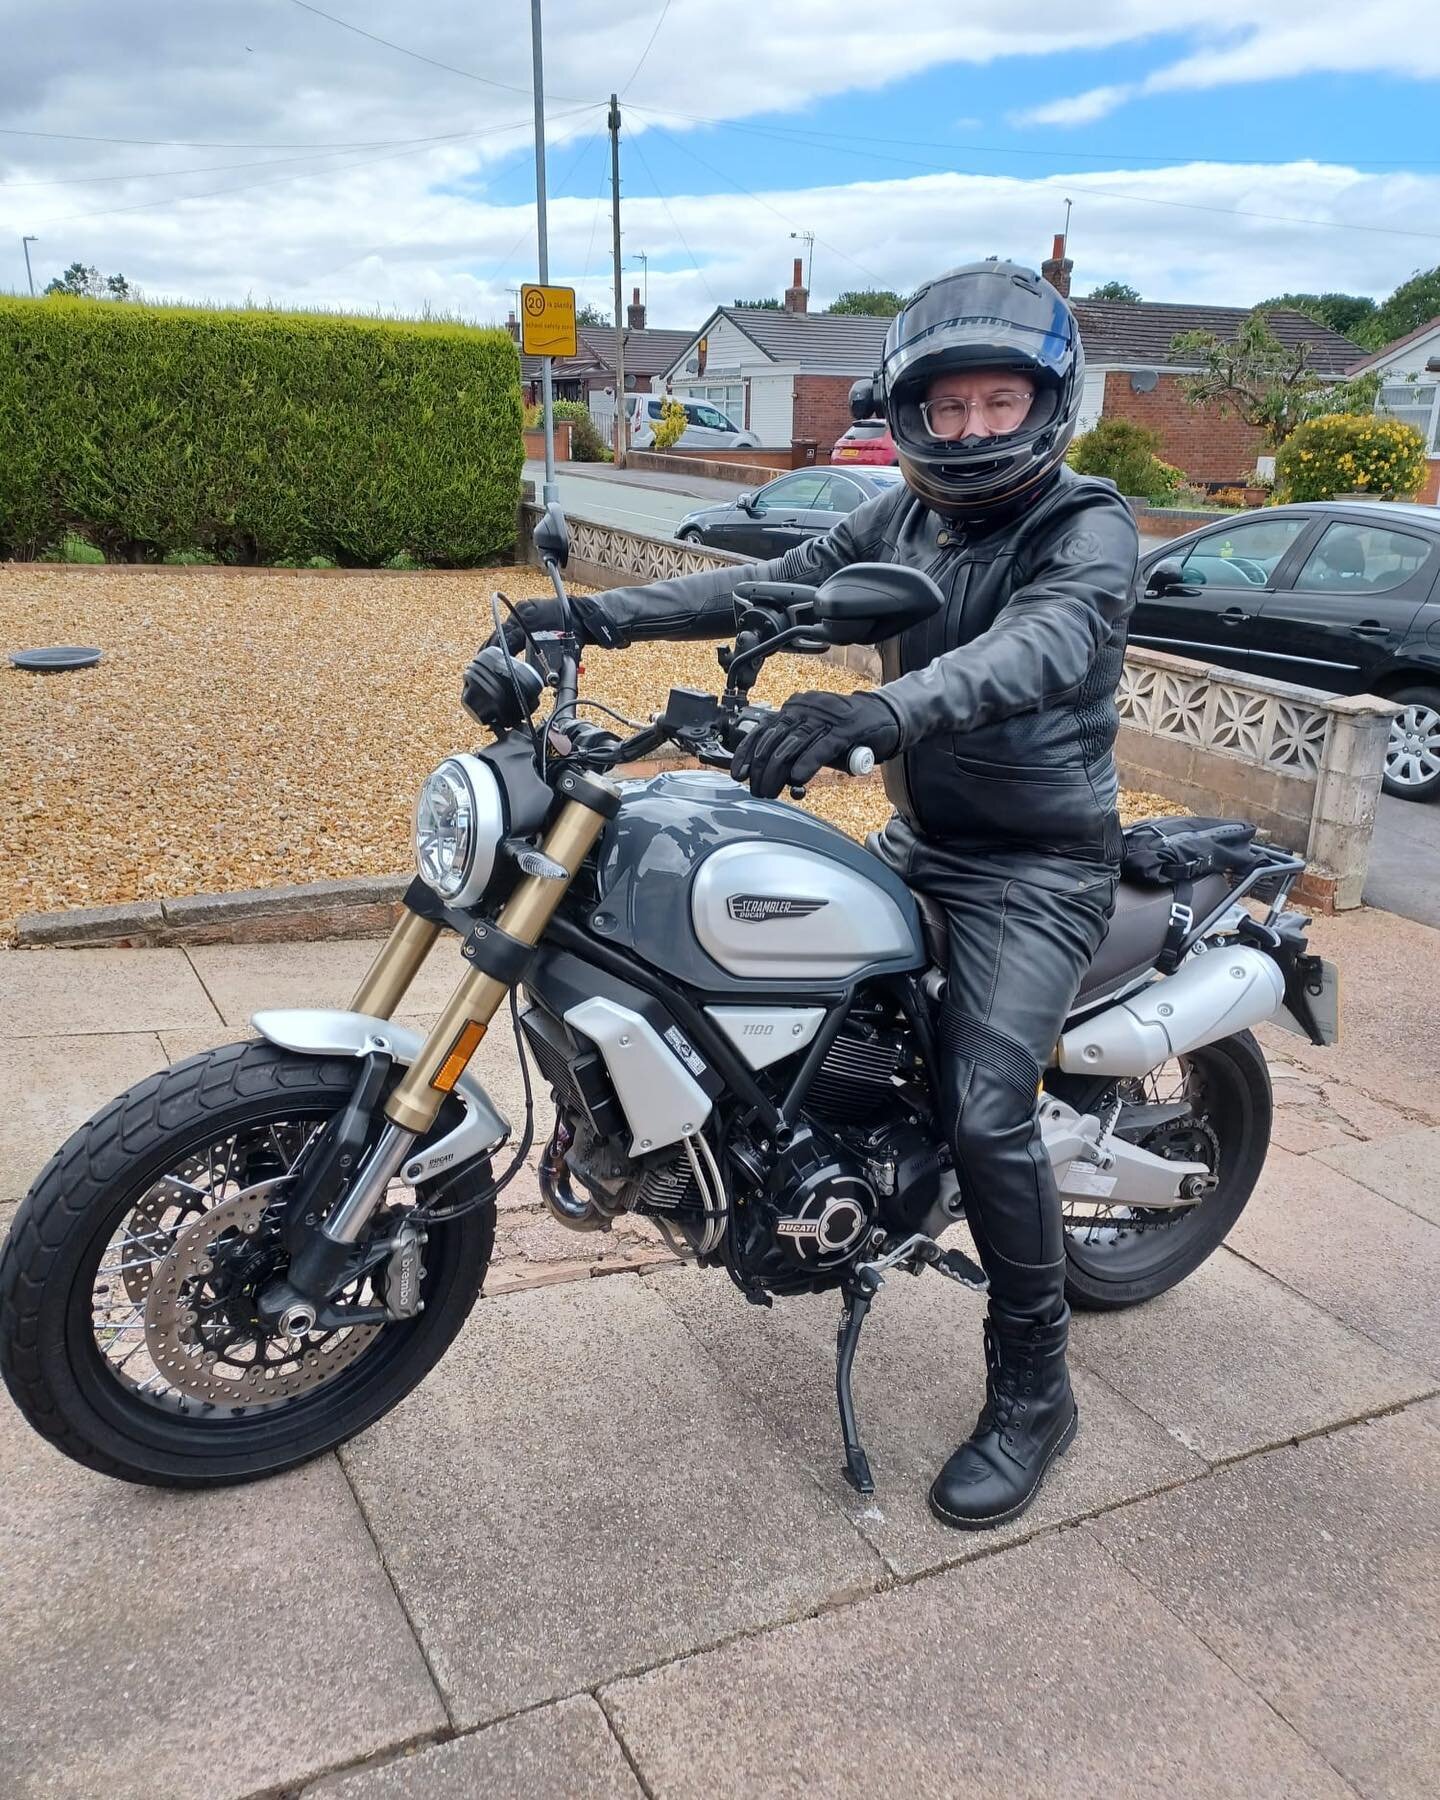 Mr Michael Dadge in Switzerland is a happy man (Can you tell!? 😜😎) now that he received his Pagnol #m3motopants to go with his mighty #m2motojacket , looking good Mike! 💥🤘